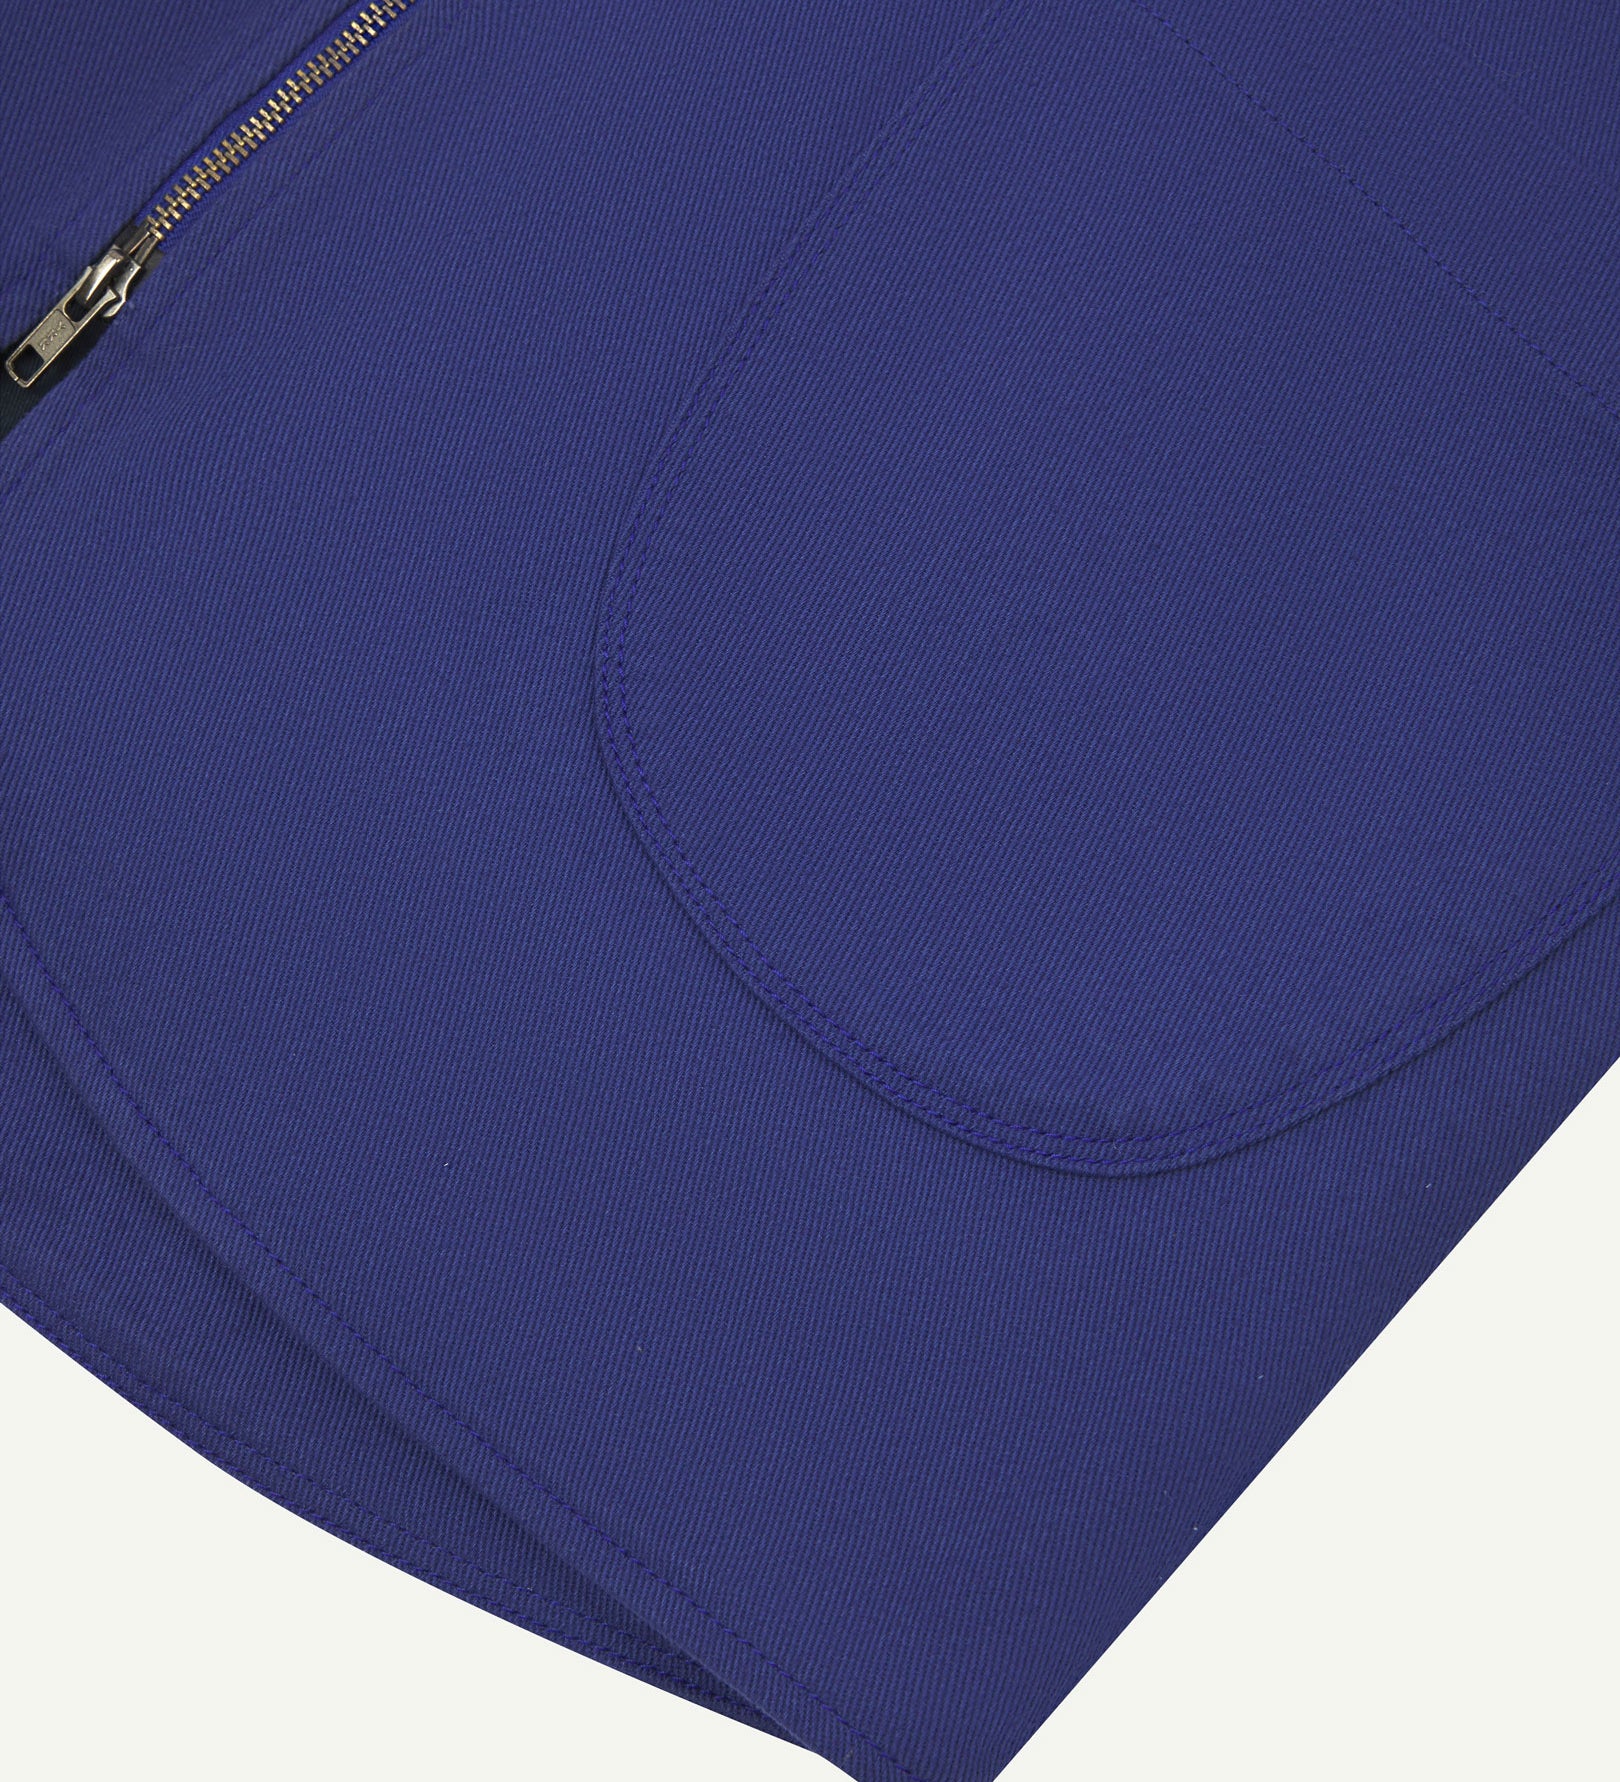 Close-up bottom-half view of #3036 ultra blue organic cotton-drill vest with focus on curved pocket detail.